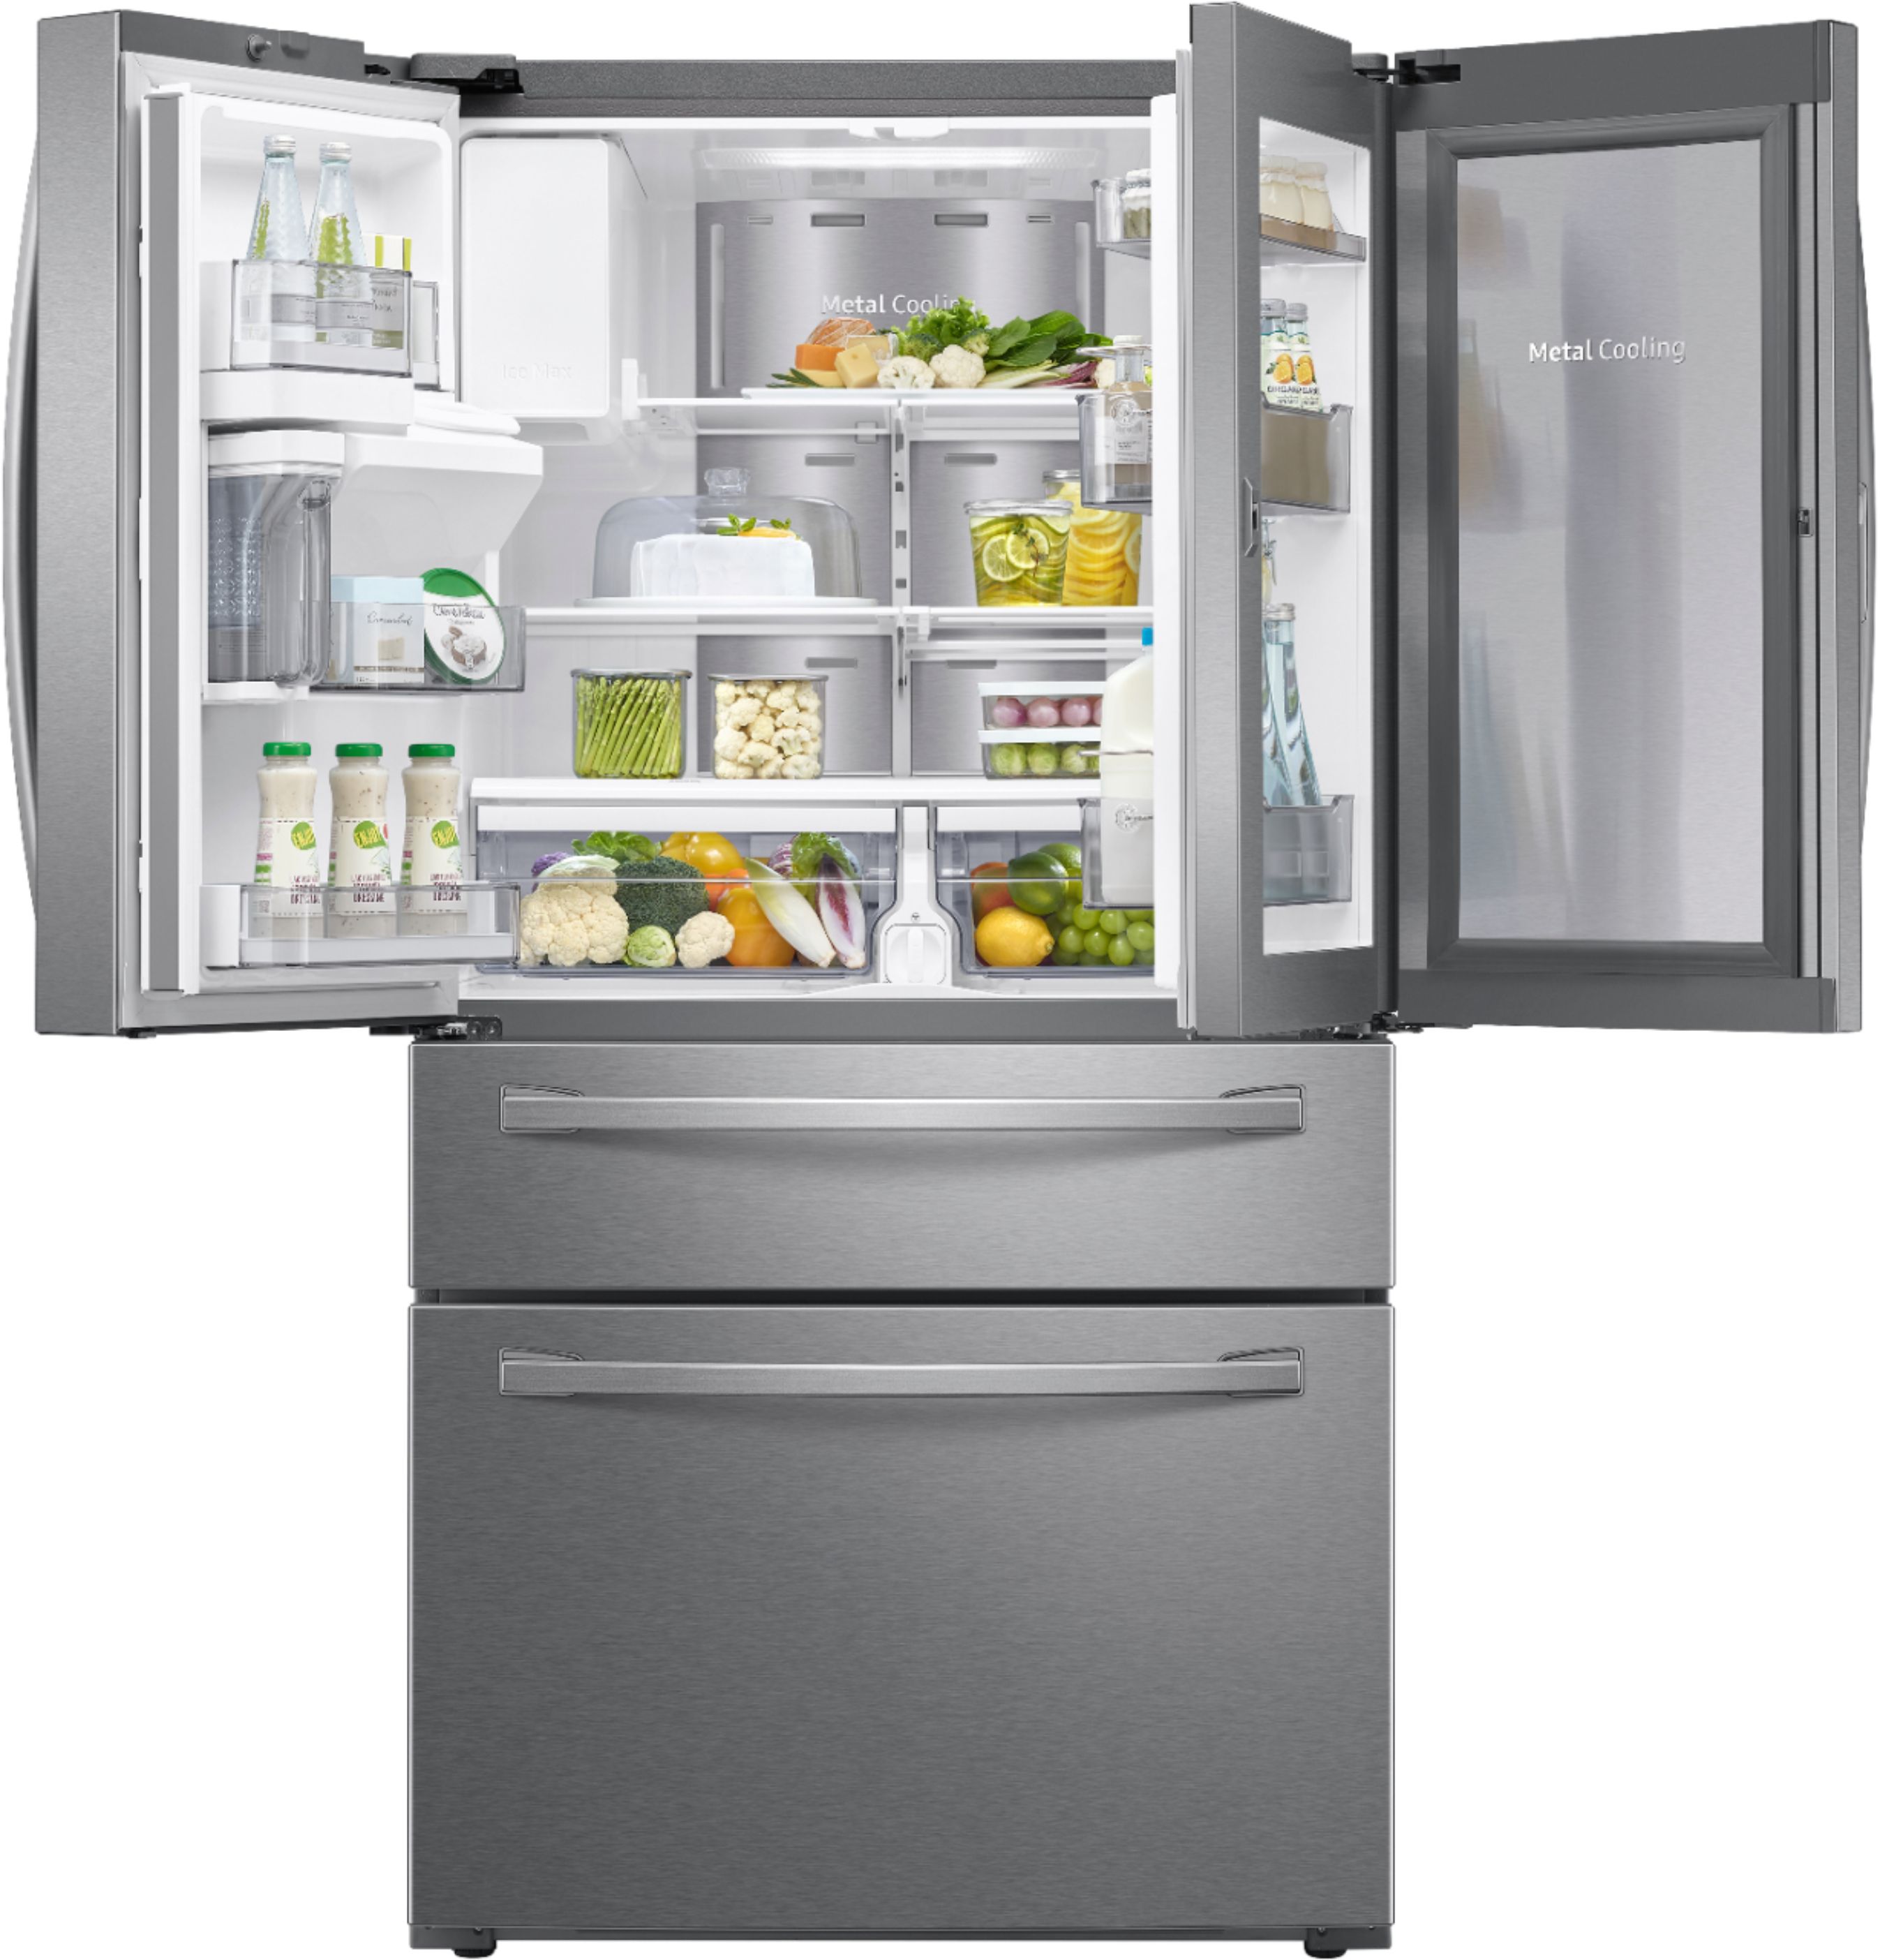 How Long Does It Take A Refrigerator To Get Cold? What You Need To Know ...